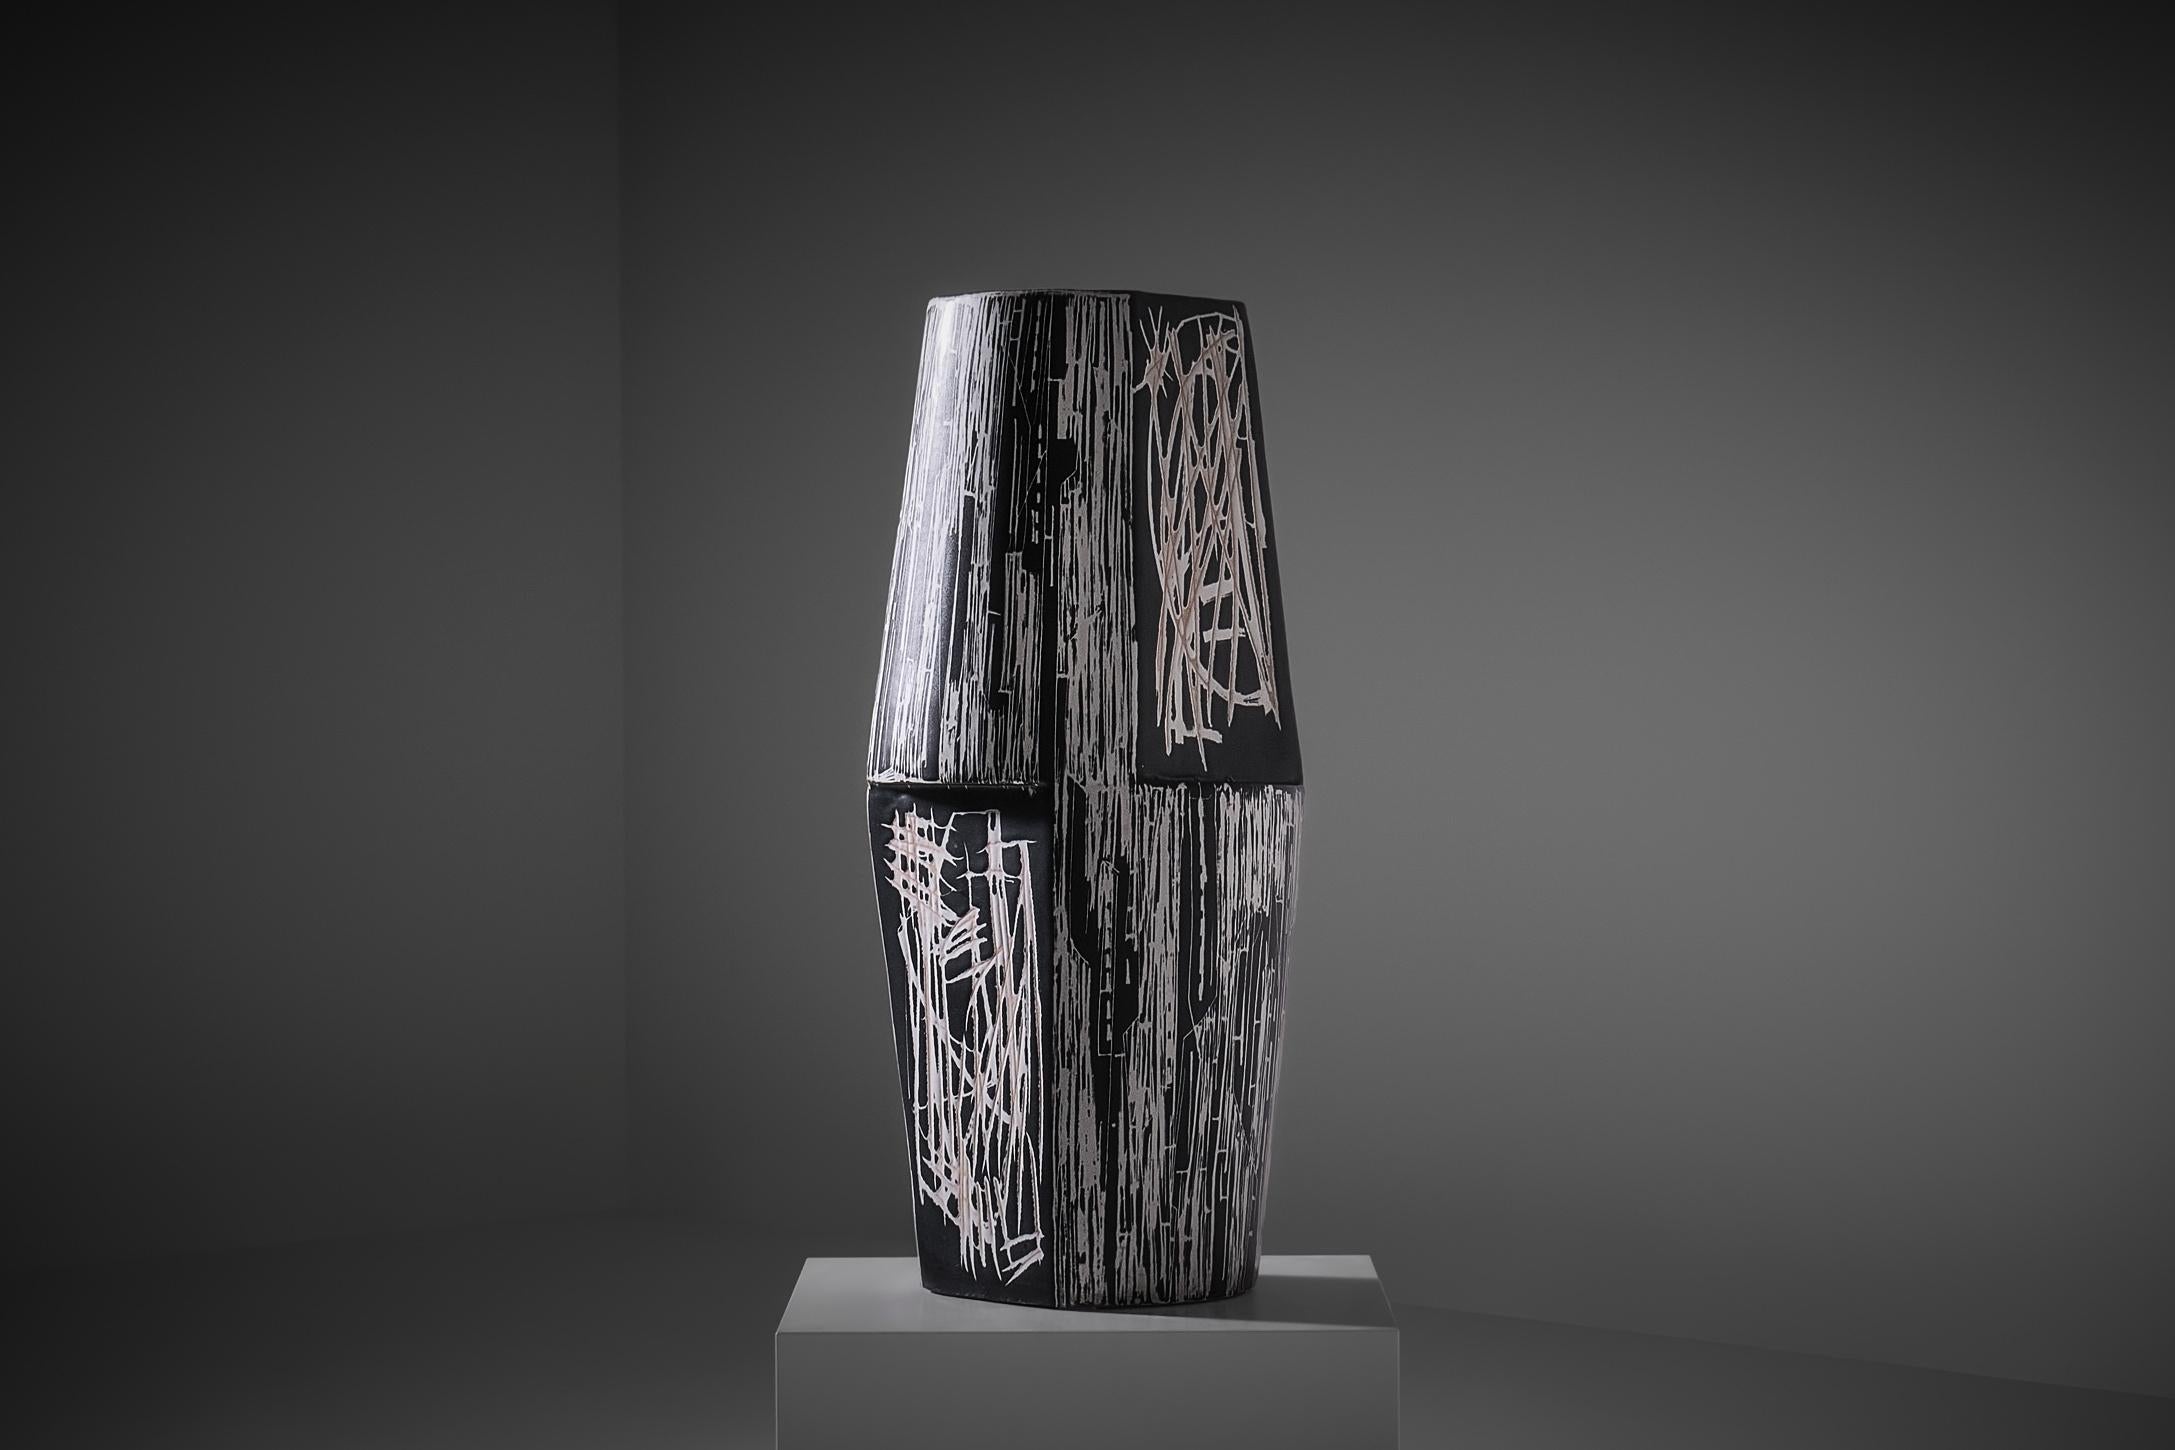 Geometric shaped ceramic vase by Victor Cerrato (1917 - 2008), Italy 1960s. Intriguing large sculptural vase made from geometric shaped panels with artistic calligraphic line drawings in black and white. Both the size, shape and crossed placed parts